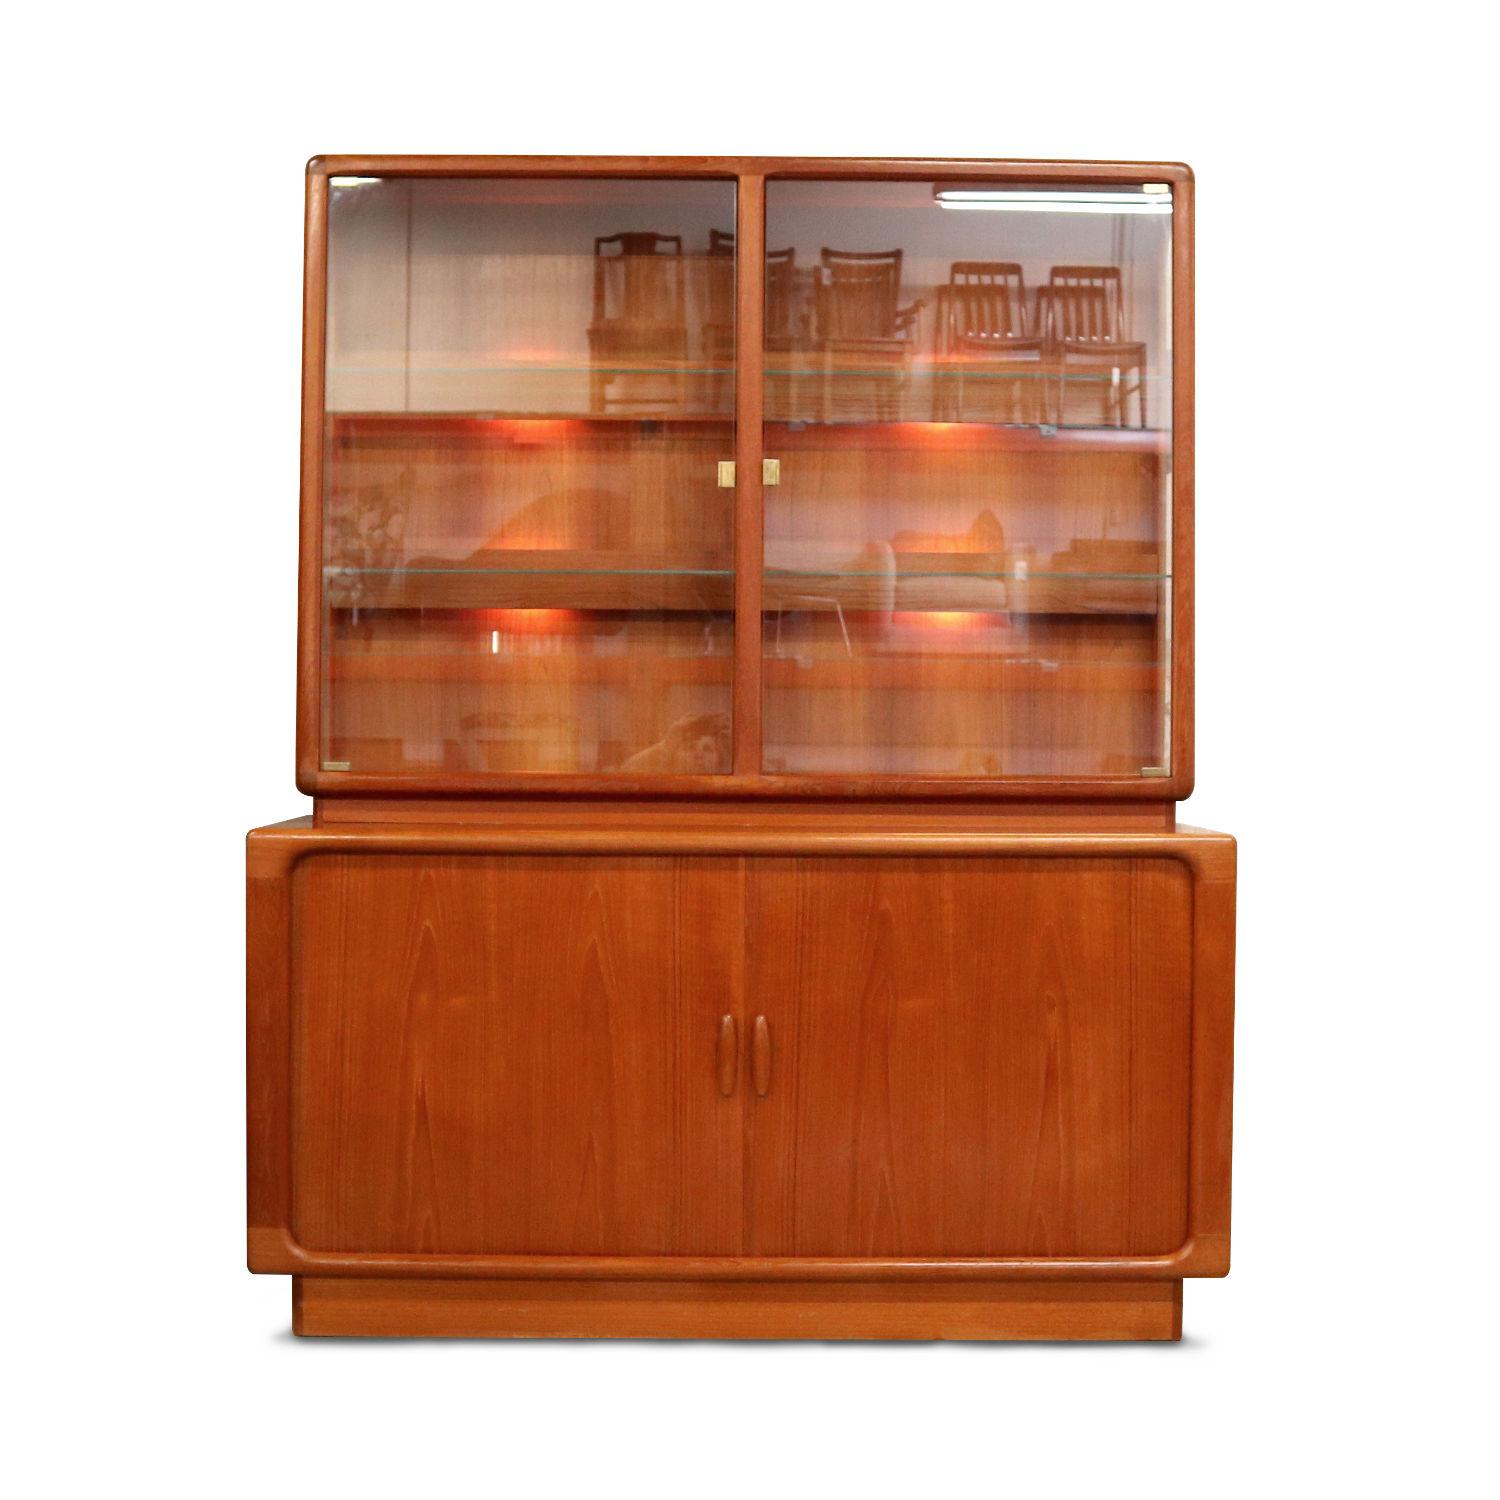 Two-piece Danish modern teak china cabinet with lighted display. The china cabinet by Dyrlund features exquisite styling and craftsmanship throughout. The unit consists of two stacked pieces, a lighted hutch top and buffet base. The gorgeous glass